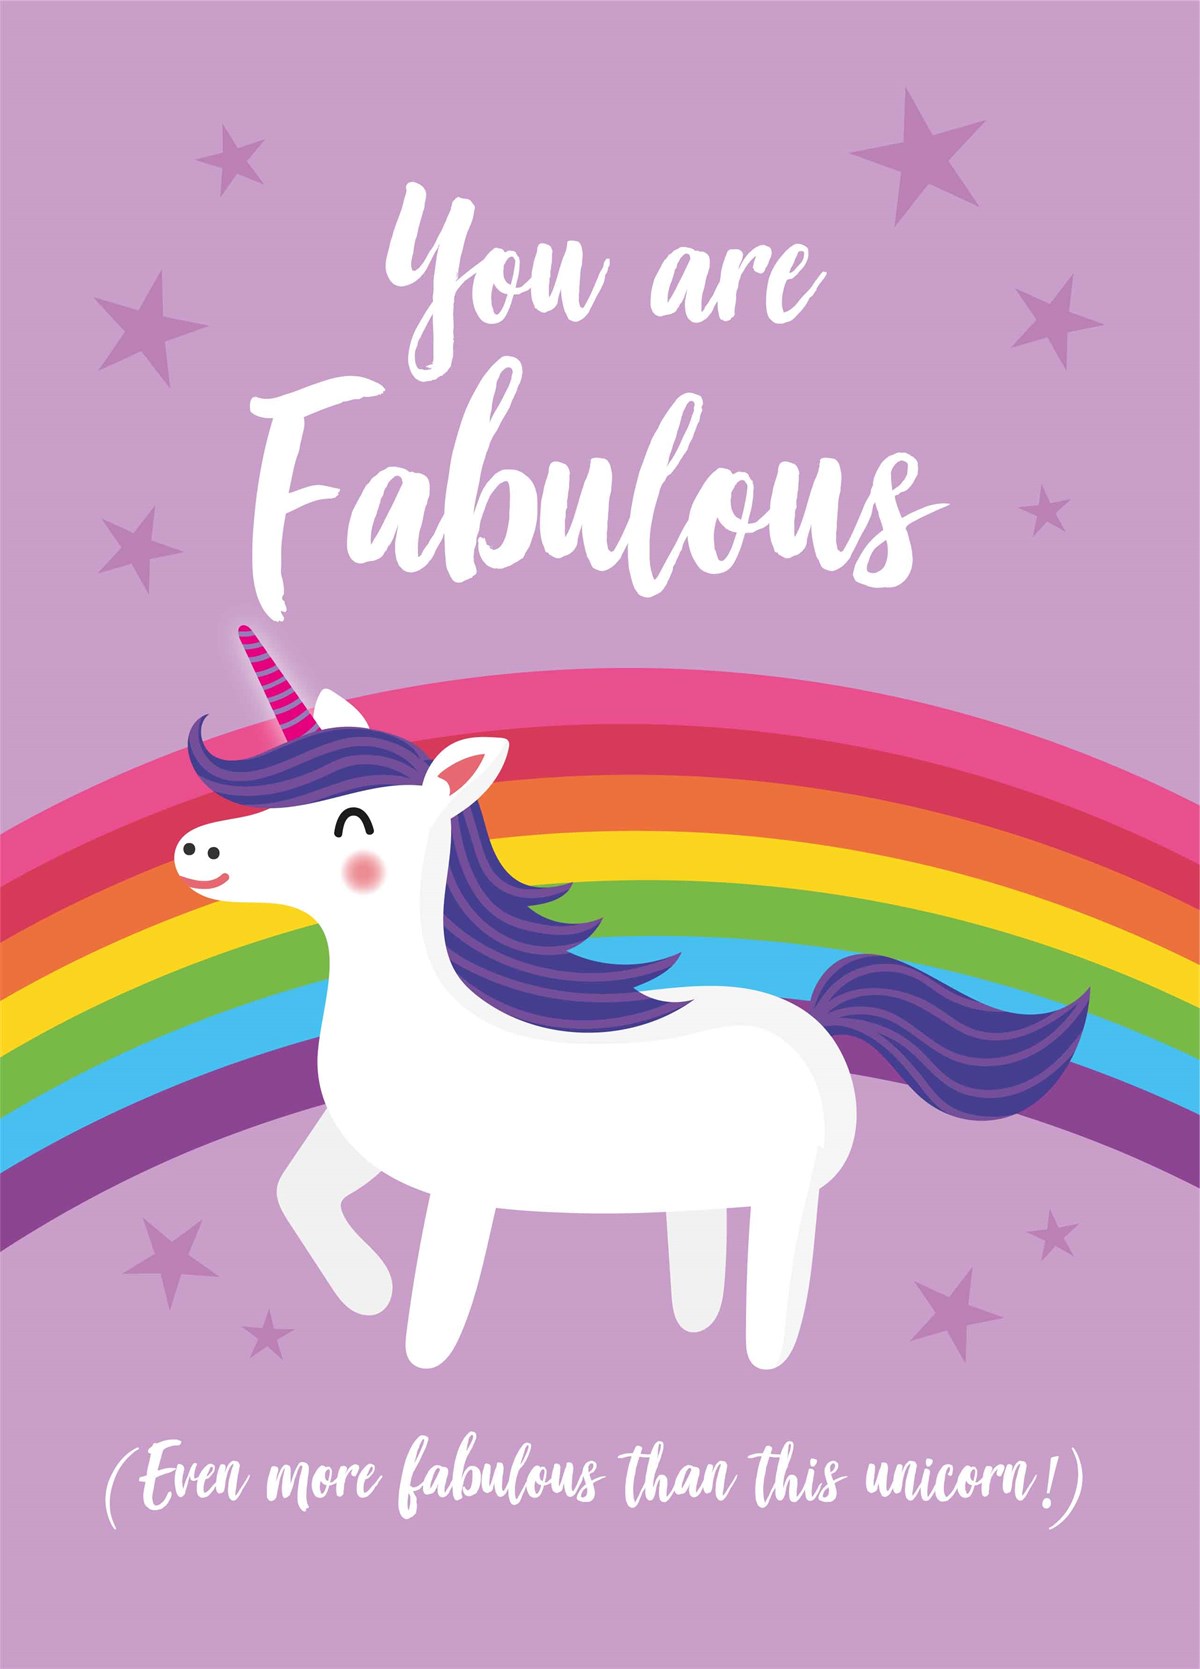 You Are Fabulous